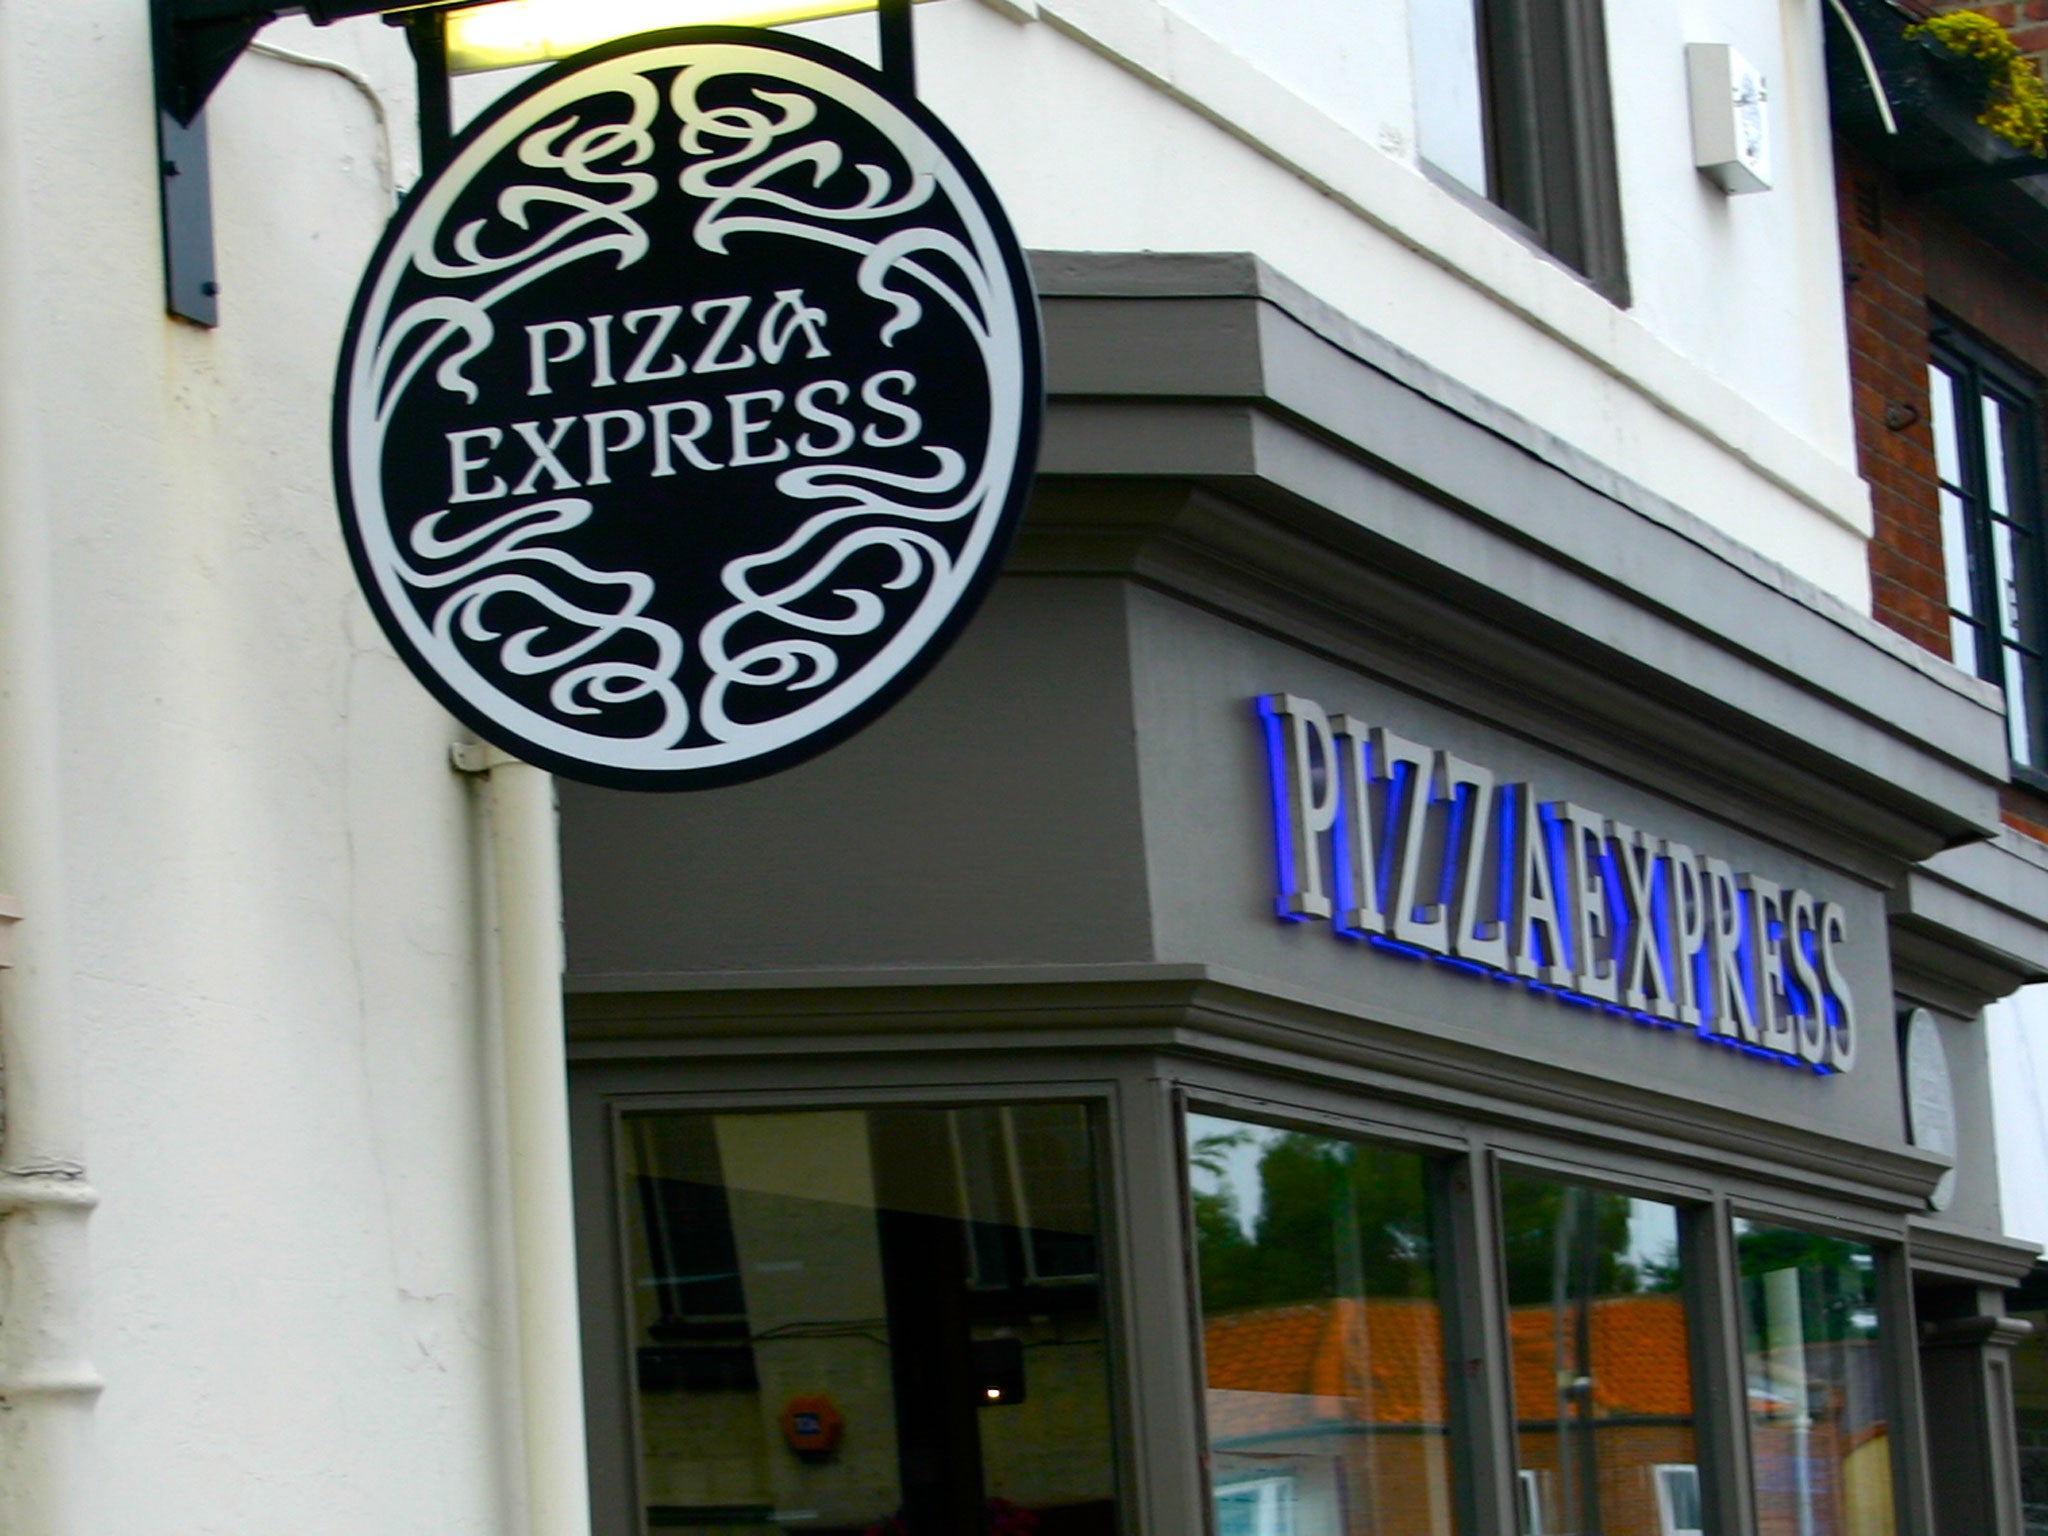 Pizza Express said that all of the birds slaughtered for its chicken dishes were pre-stunned